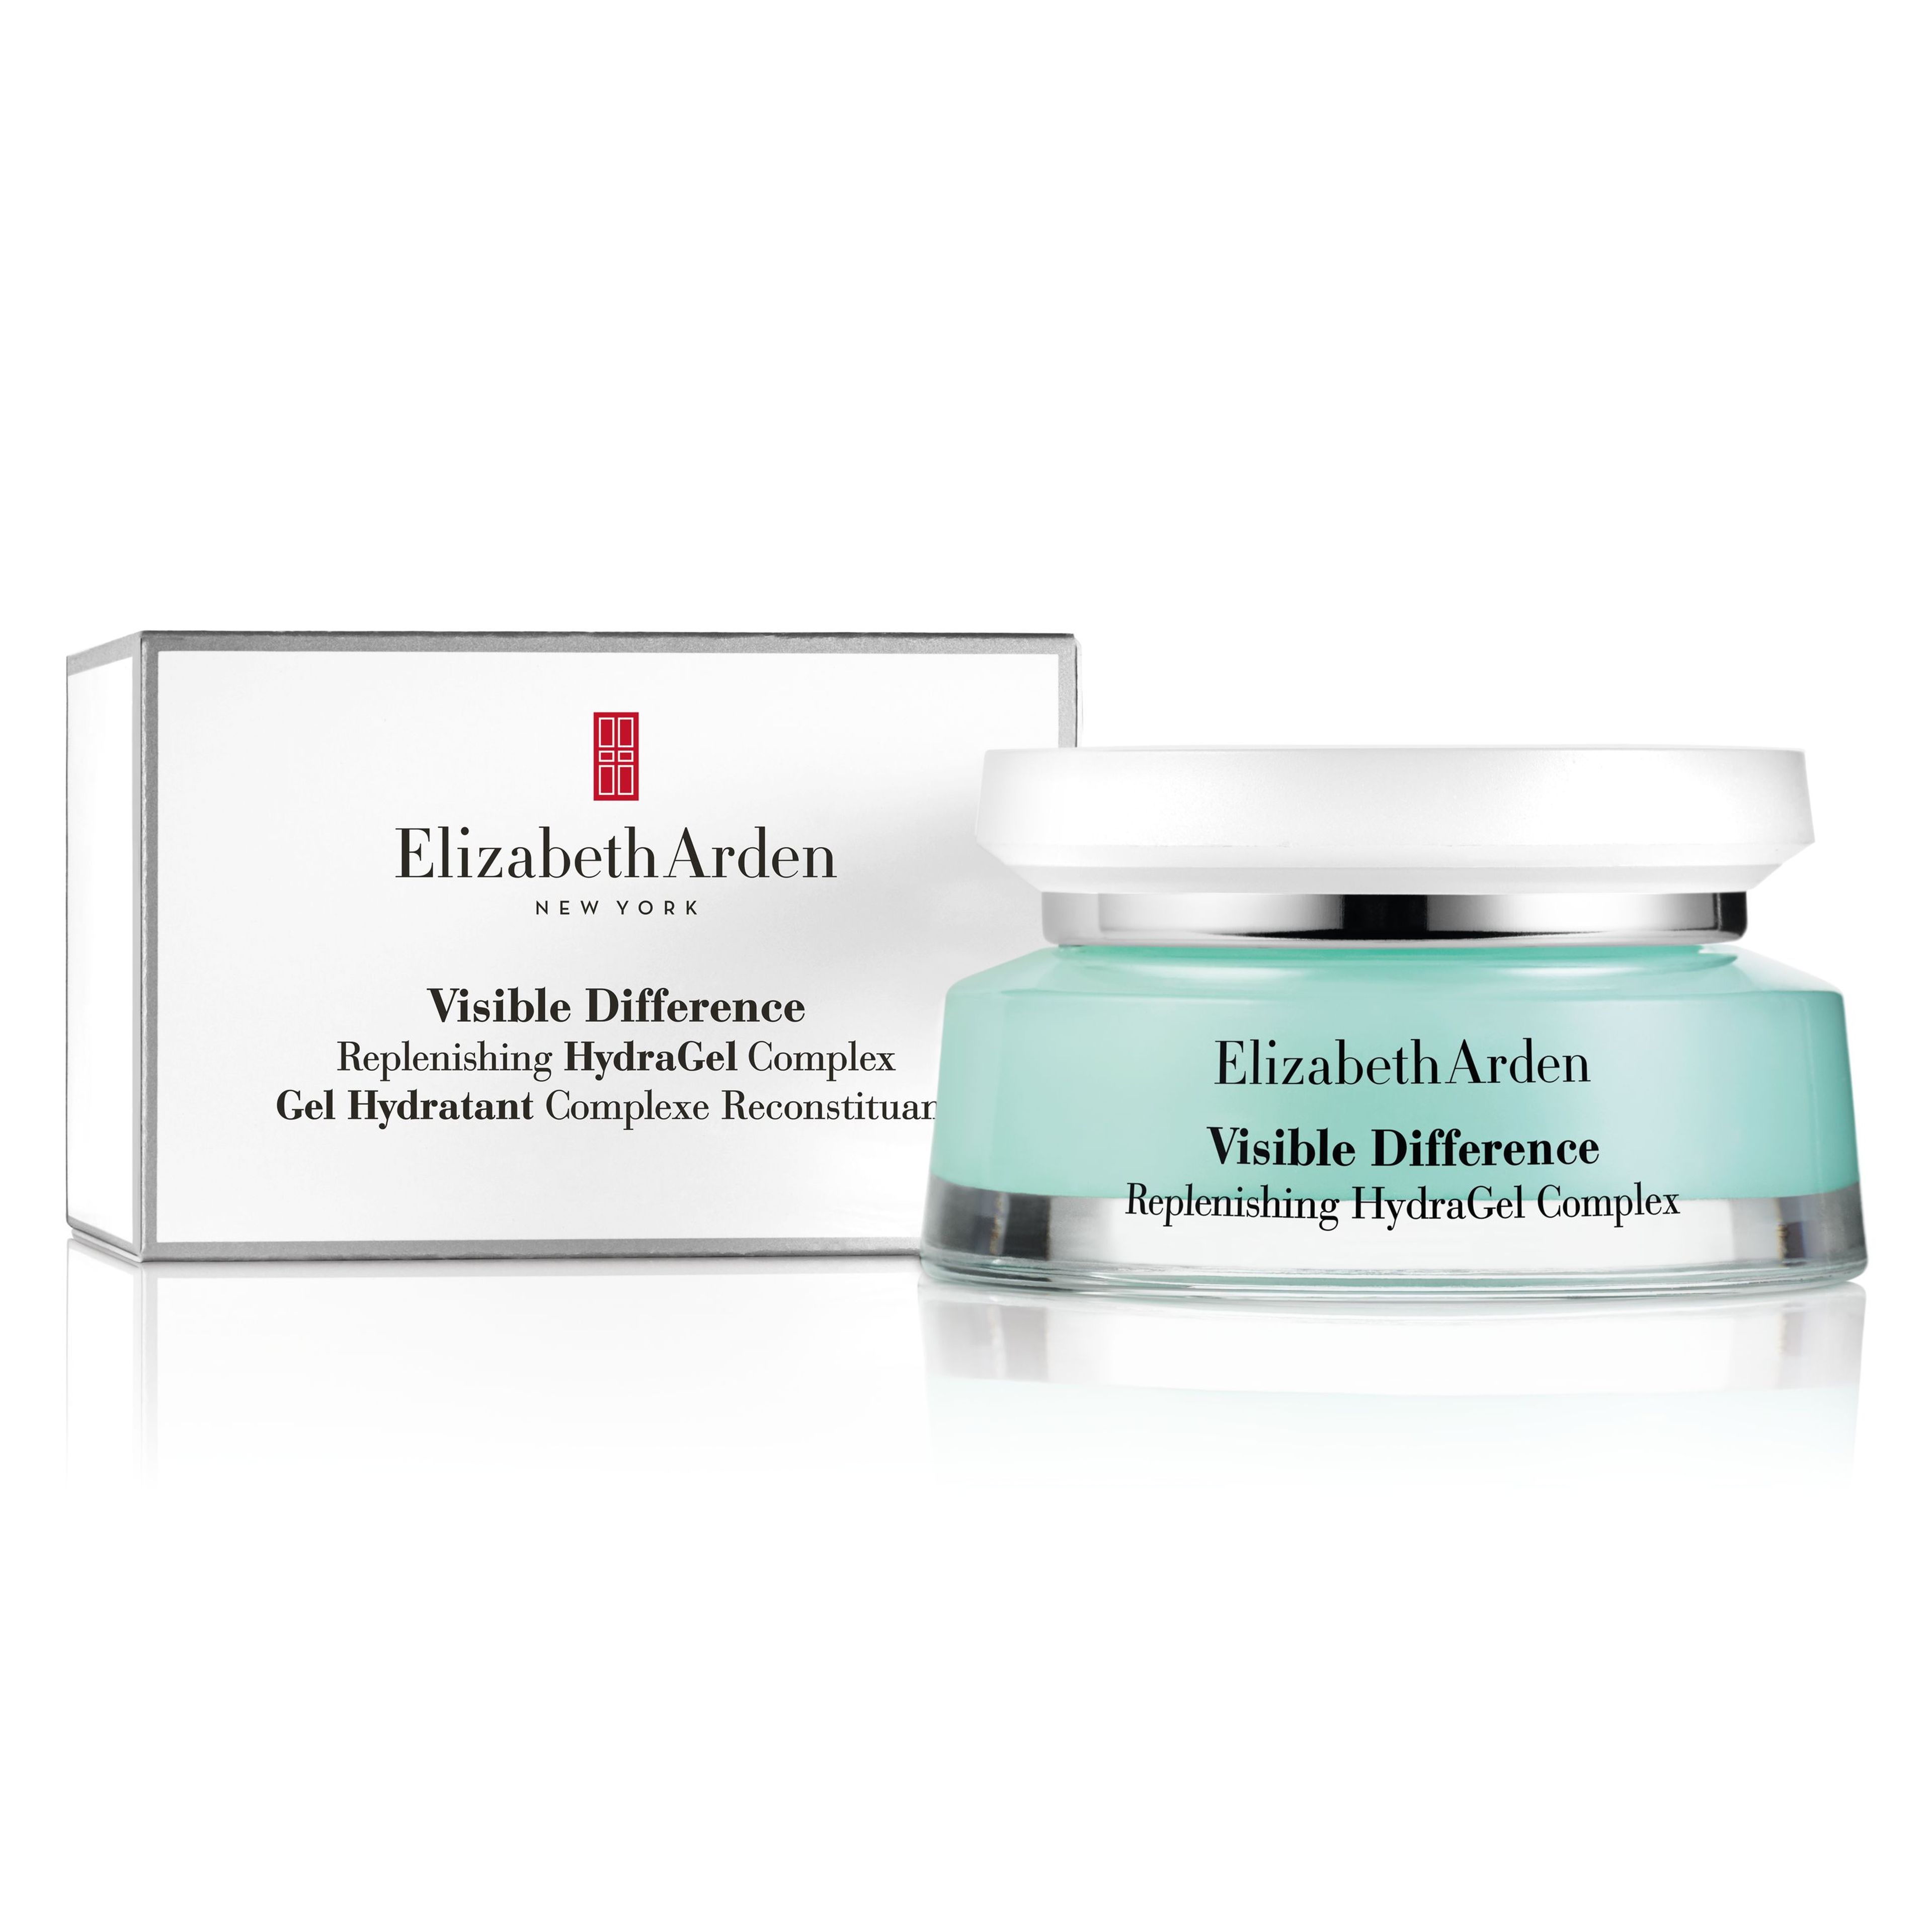 Elizabeth Arden Visible Difference Replenishing Hydragel Complex 2